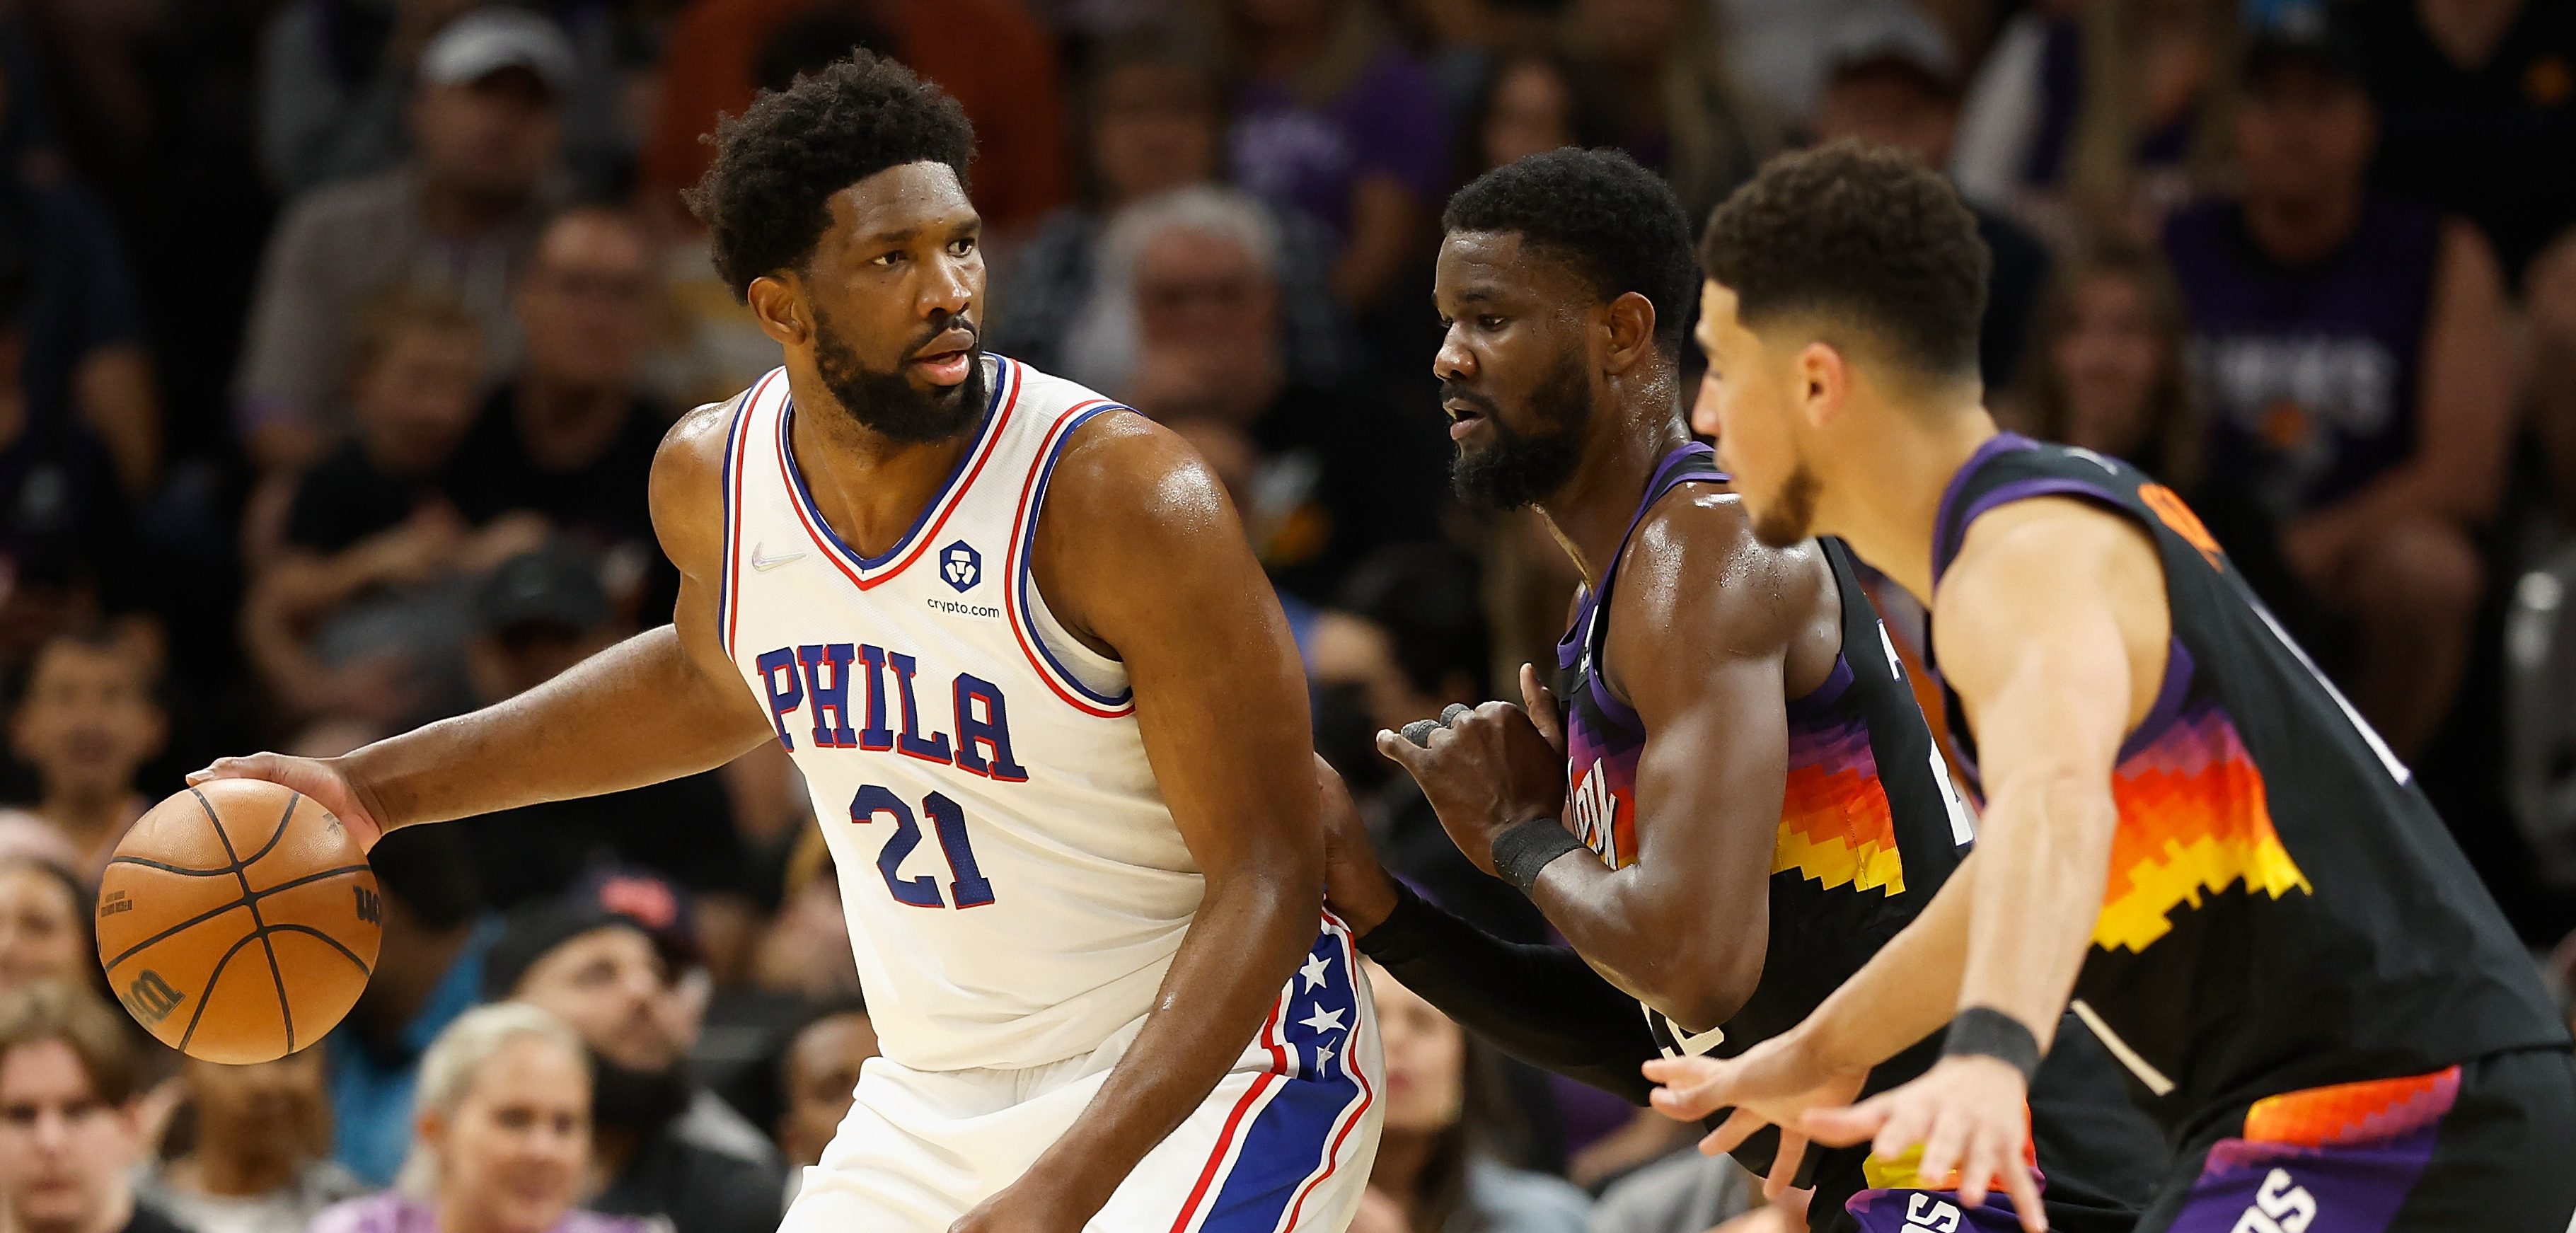 Sixers star Joel Embiid attends Eagles matchup vs. Cowboys, meets